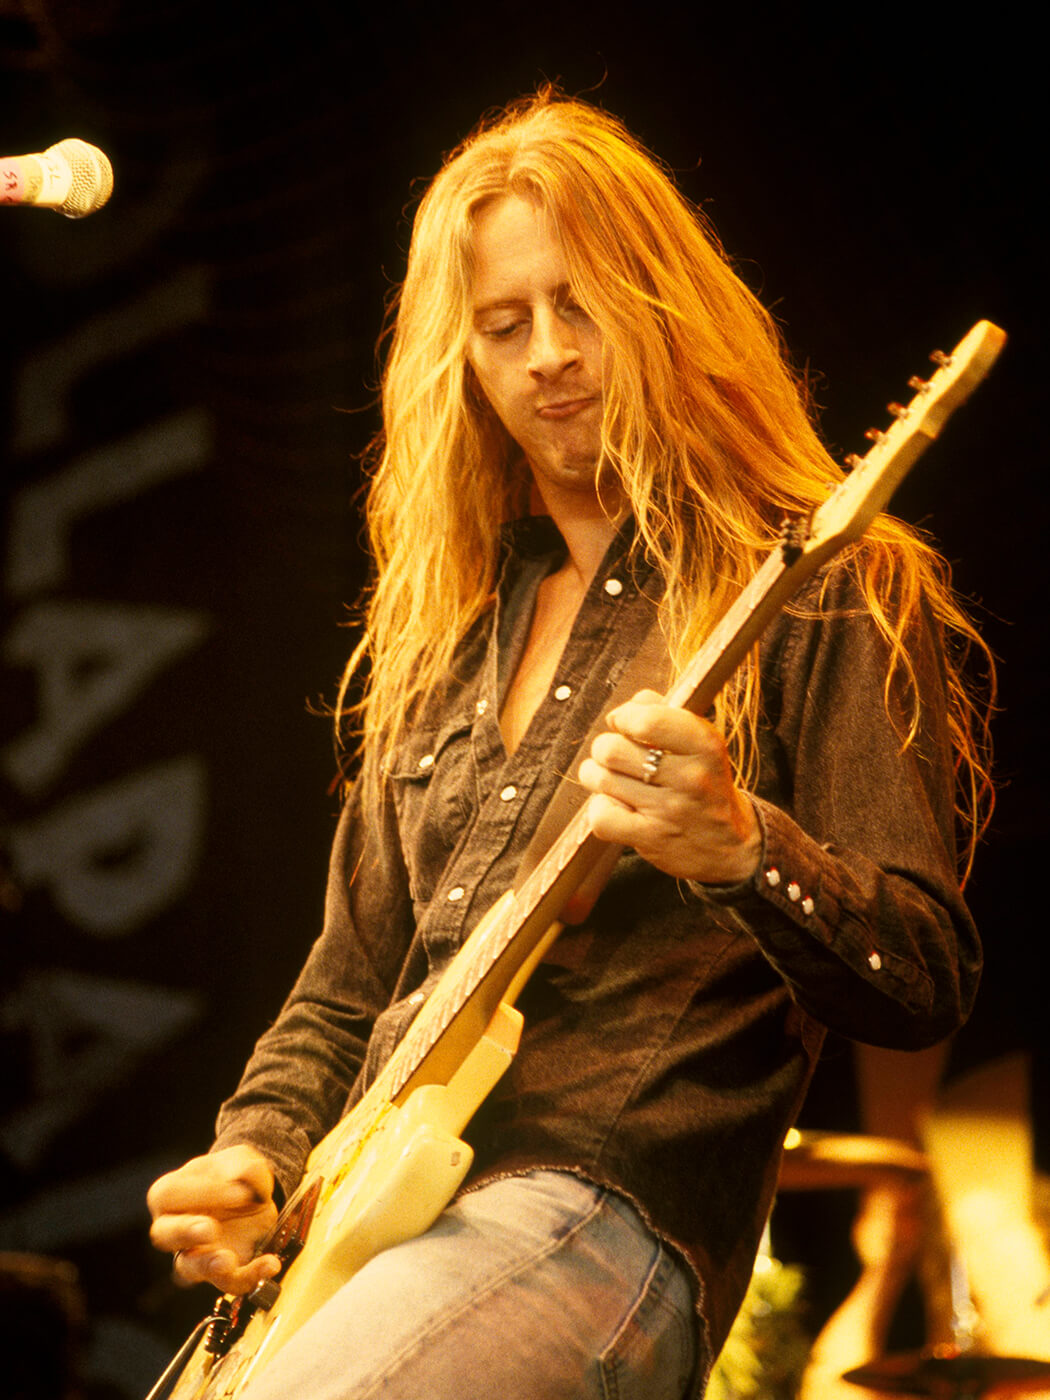 Jerry Cantrell performing with Alice in Chains at Lollapalooza in 1993, photo by John Lynn Kirk/Redferns via Getty Images